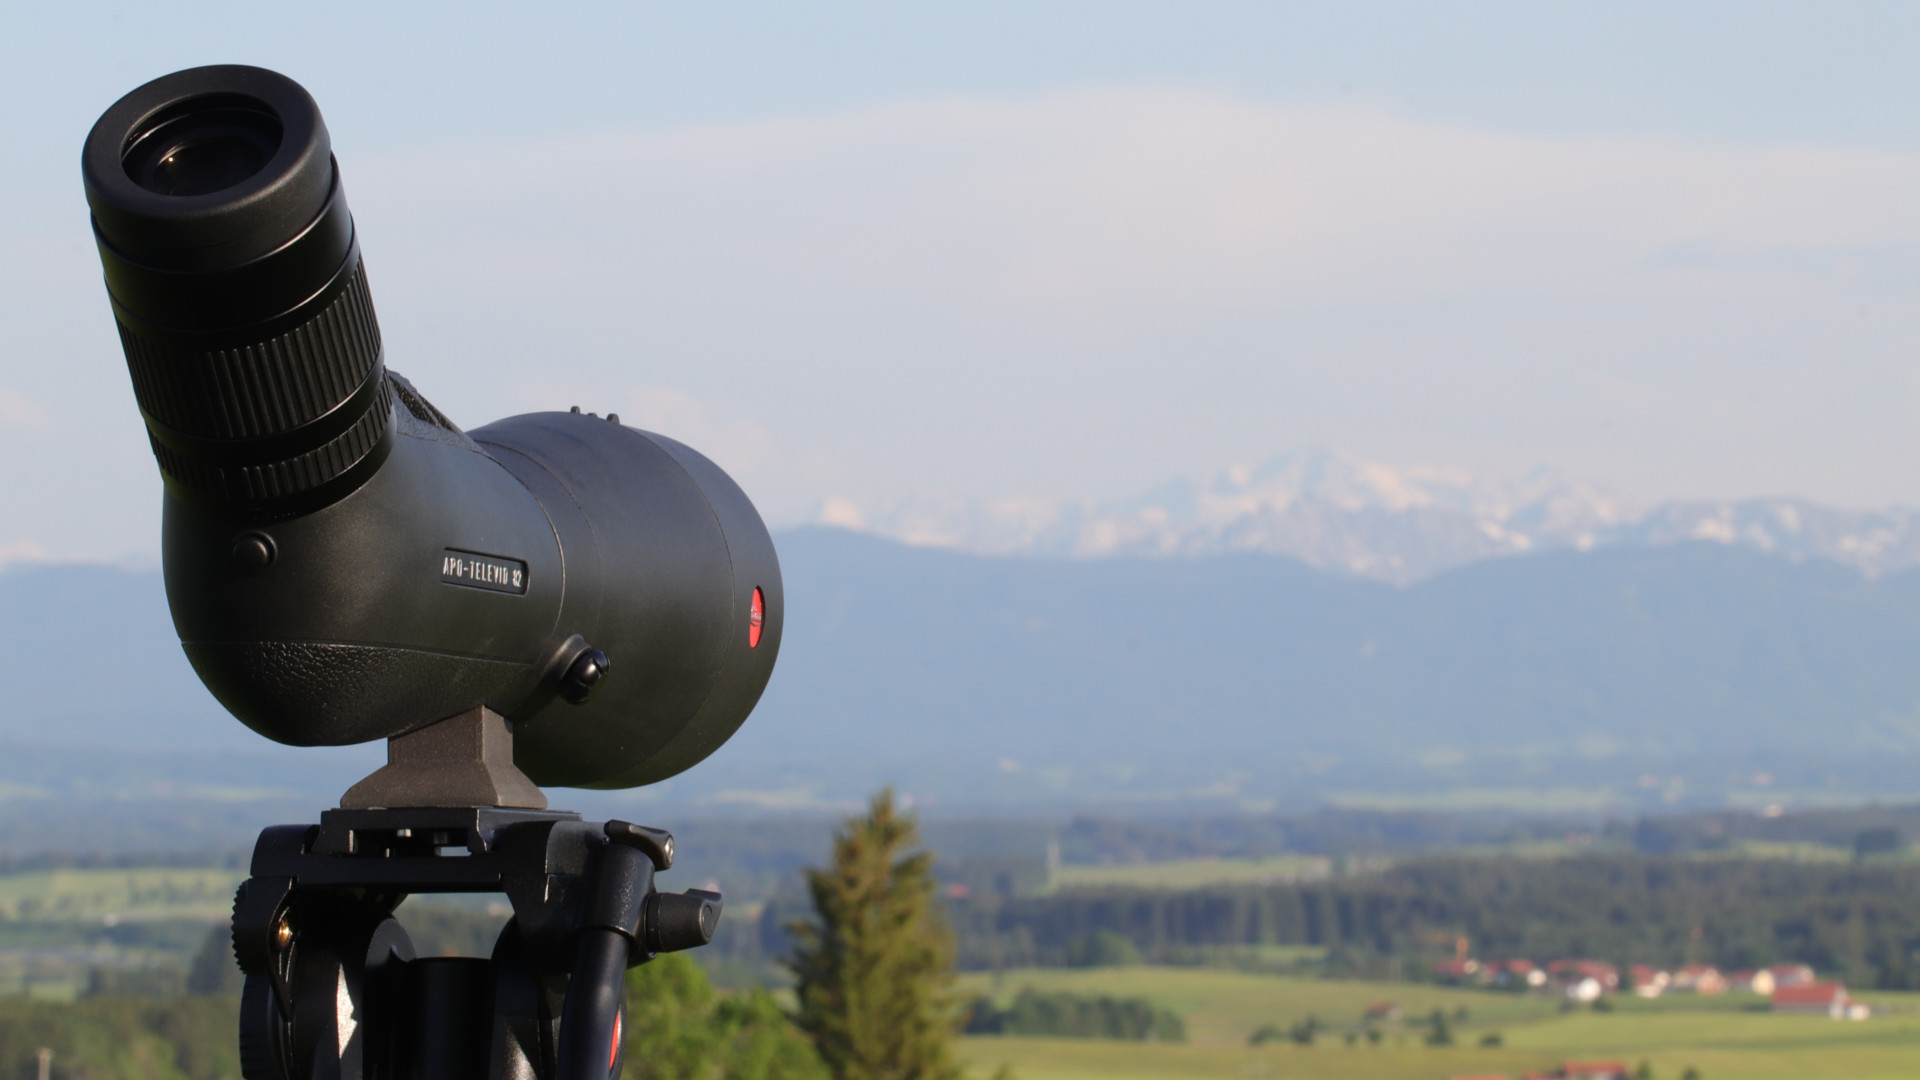 What accessories do I need for my spotting scope?